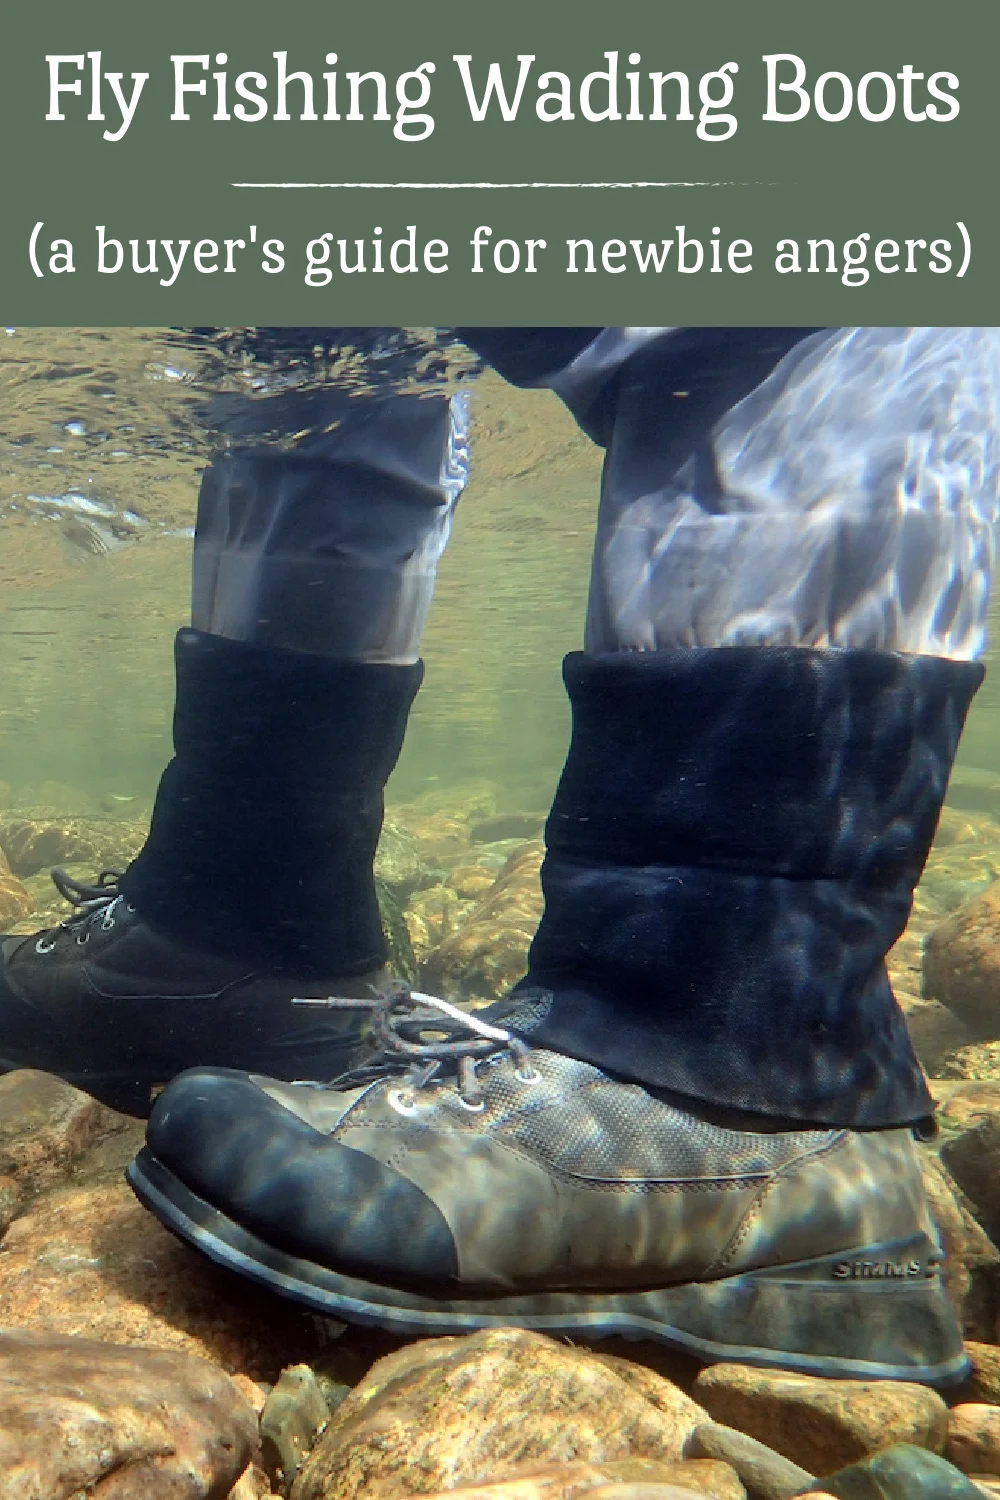 Backpacking with waders/boots : r/flyfishing